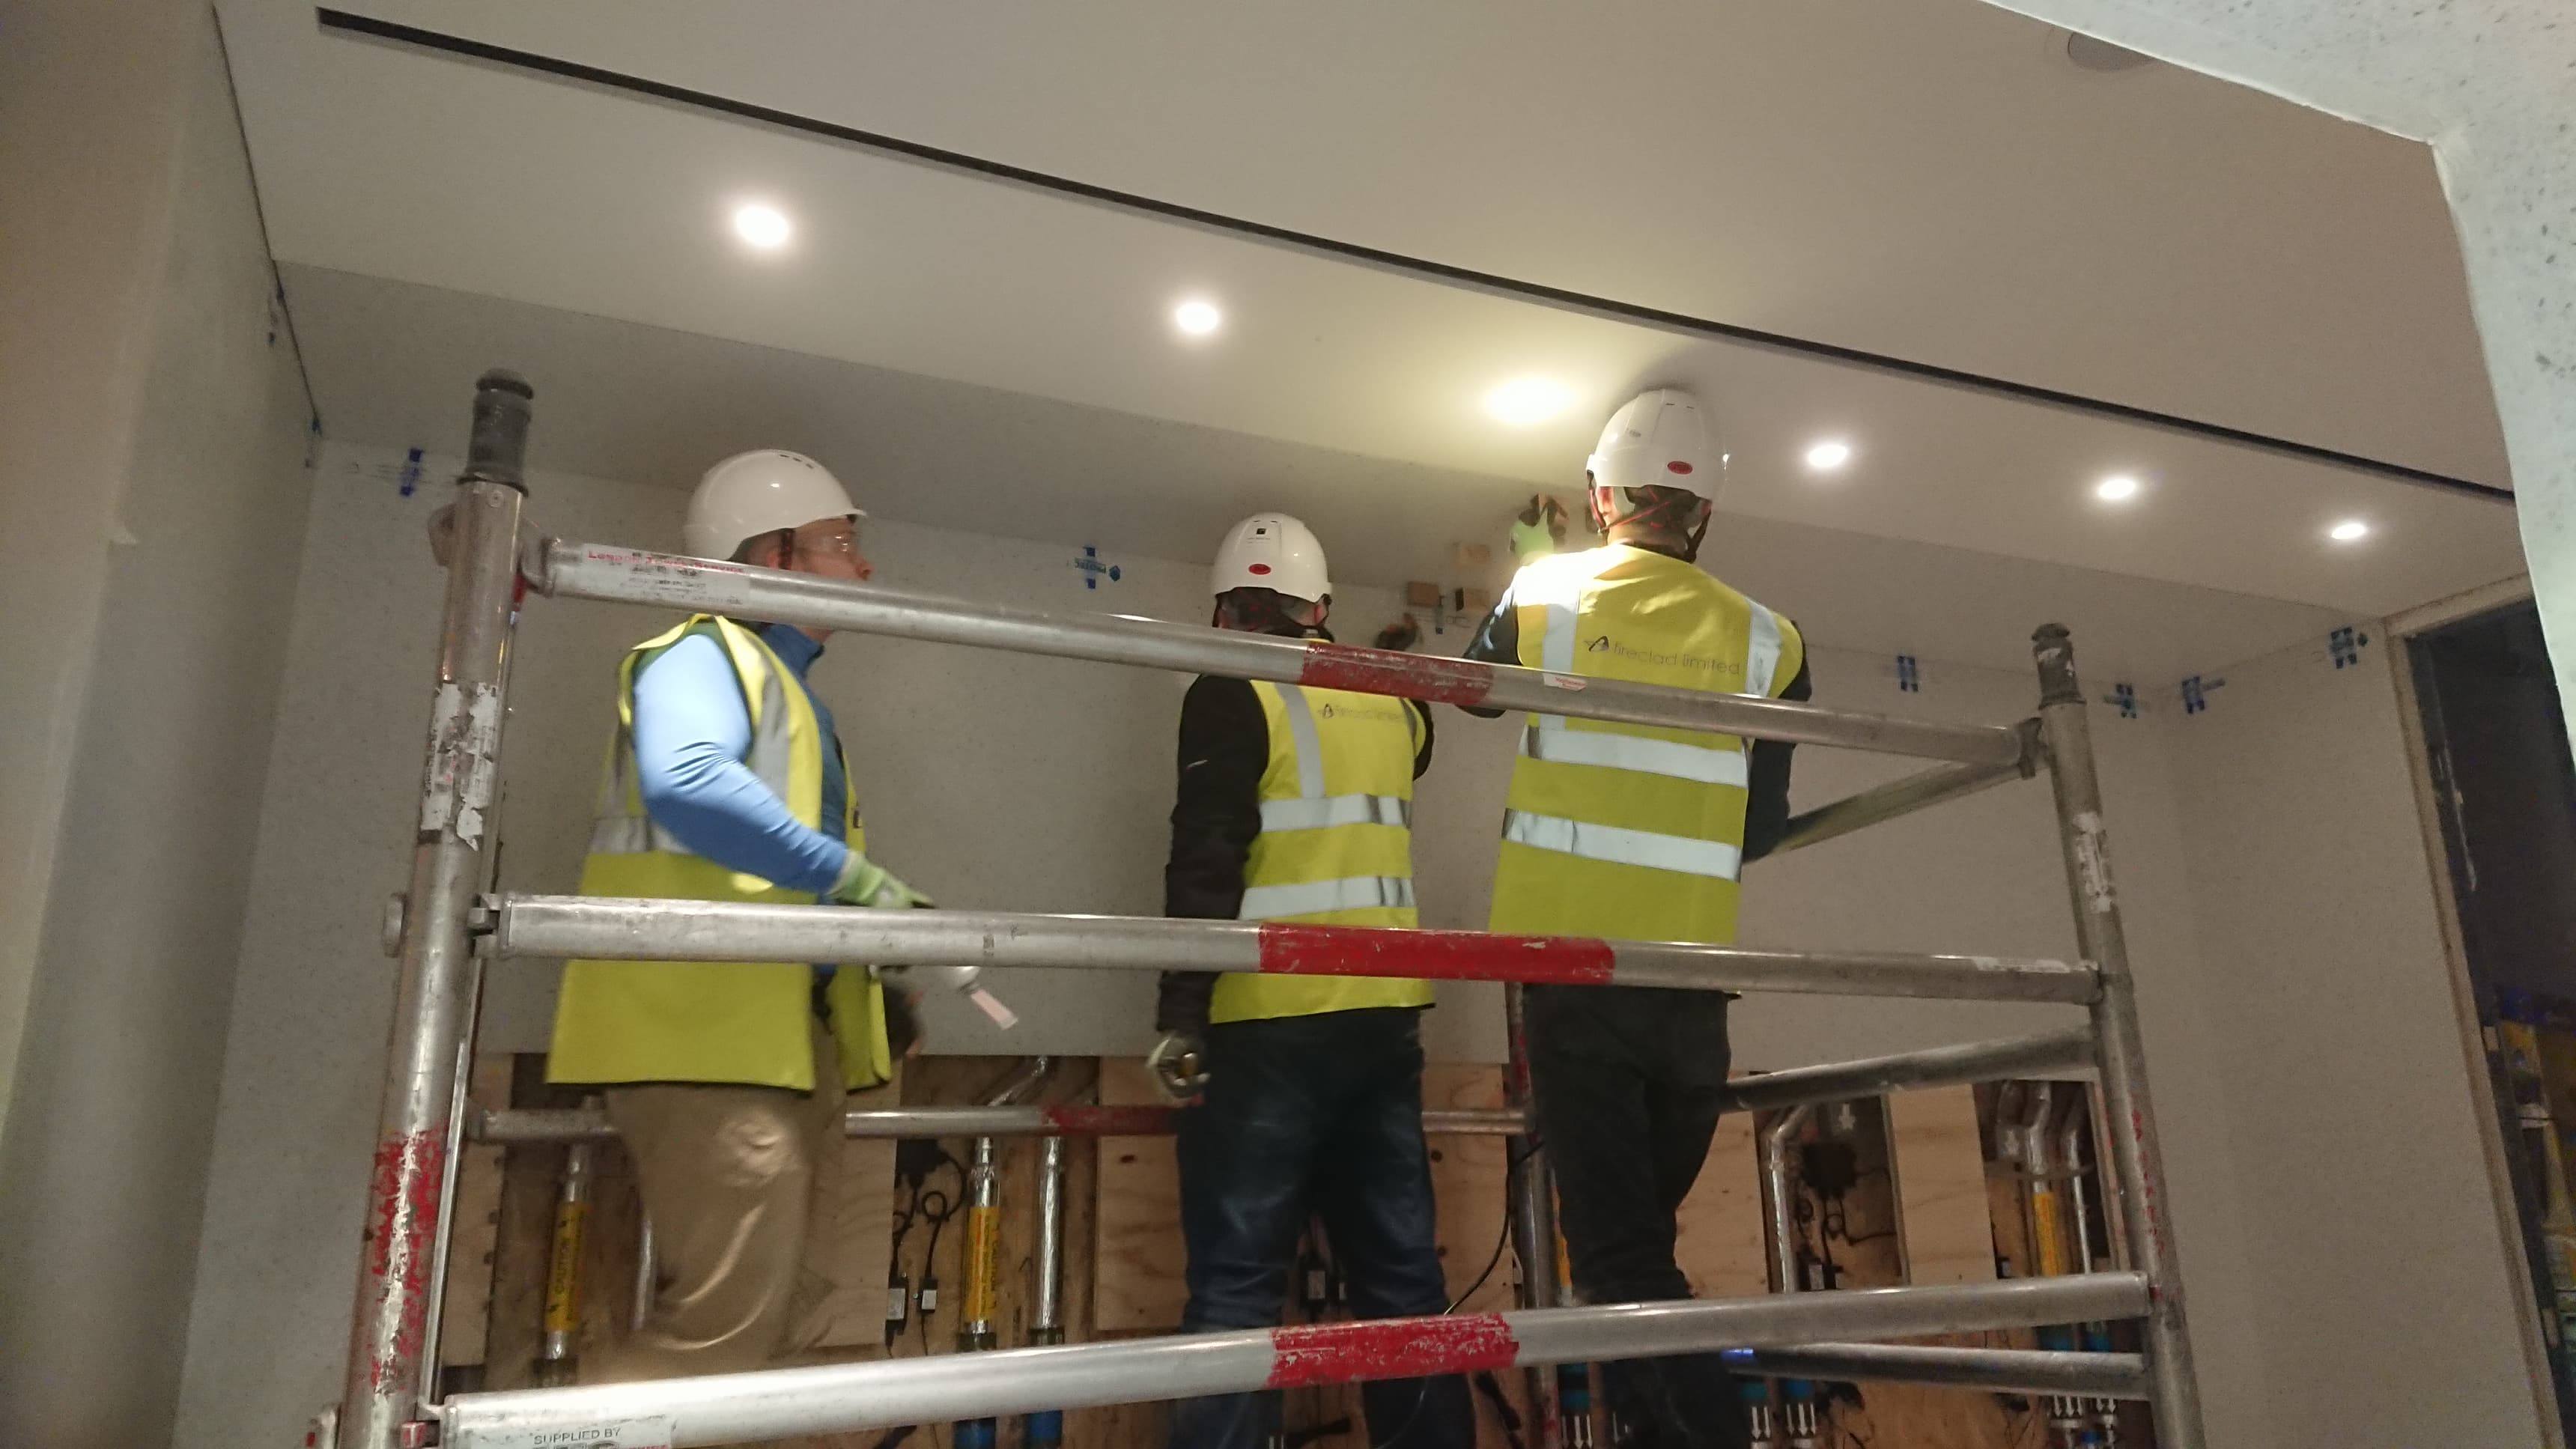 Plumtree Court, Shoe Lane, Central London, EC4 - Skilled Corian fitters 14